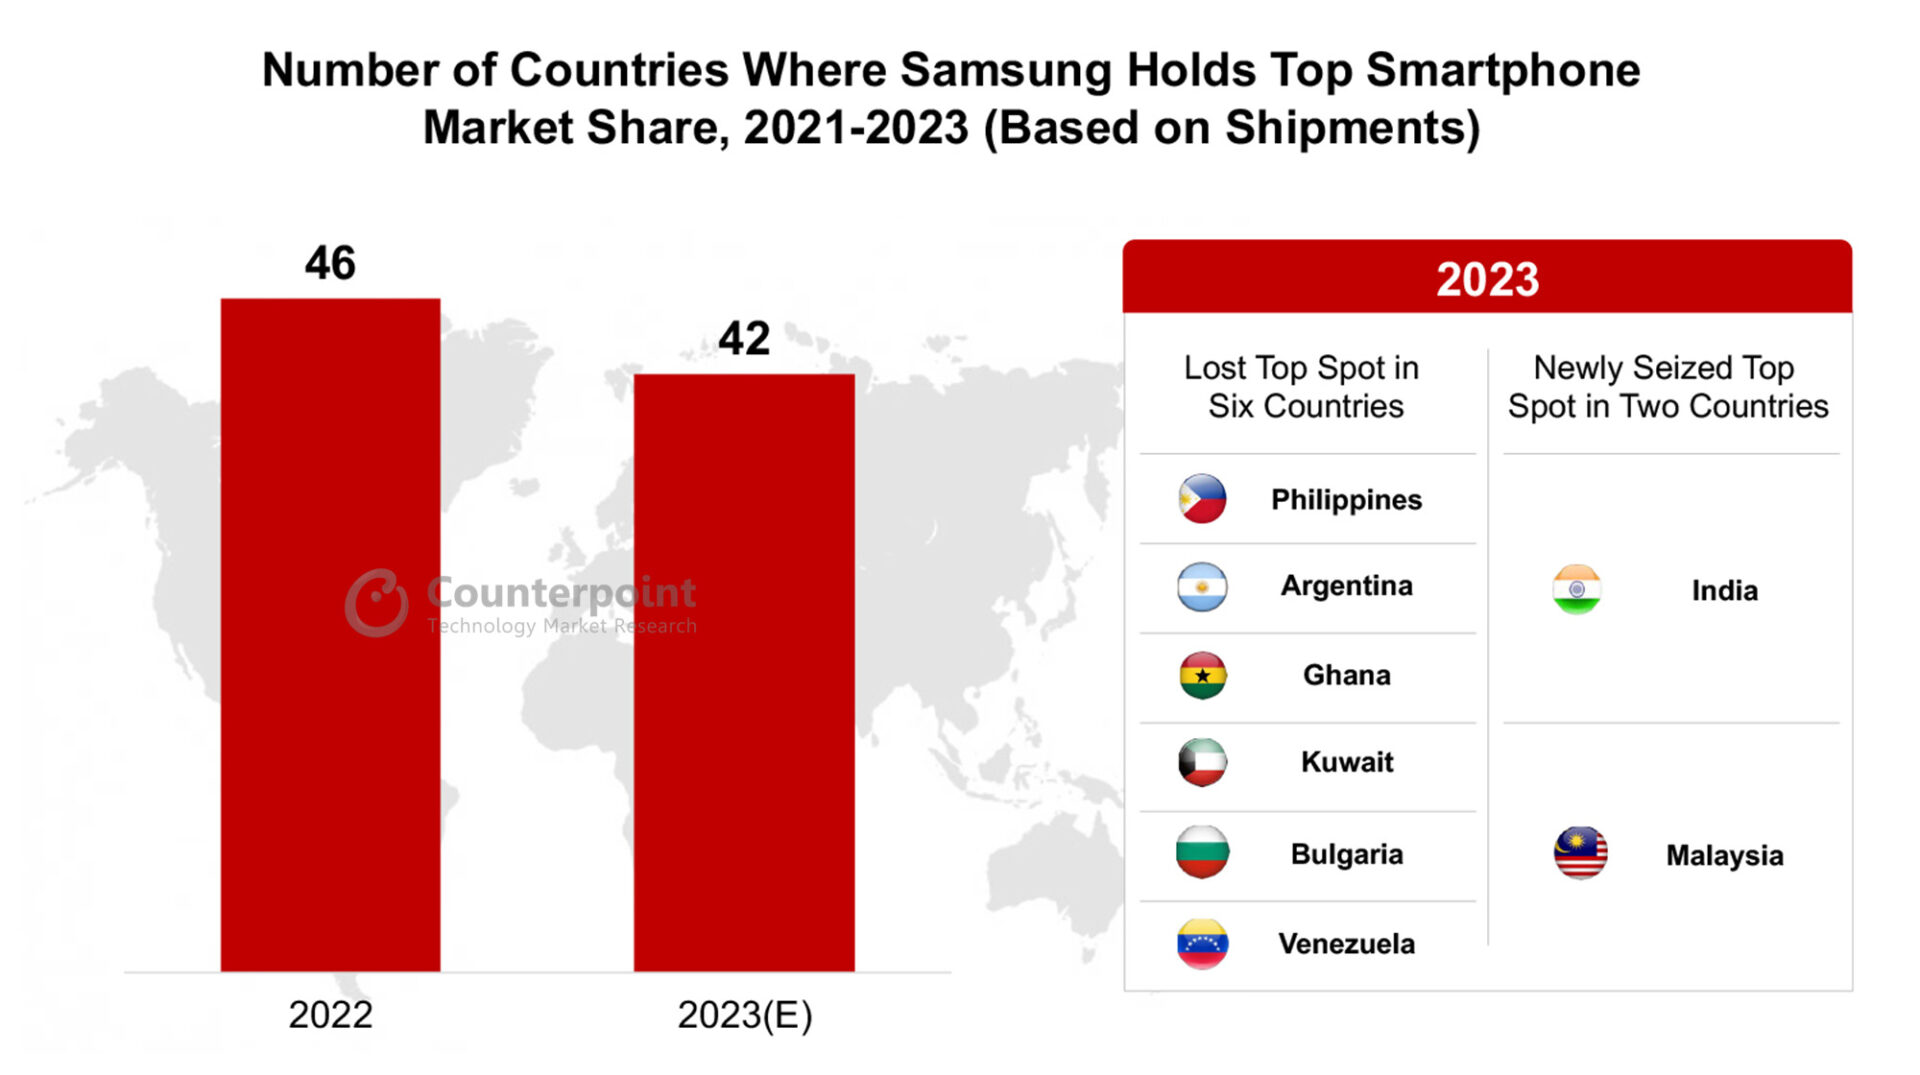 Number of Countries Where Samsung Holds Top Smartphone Market Share 2021-2023